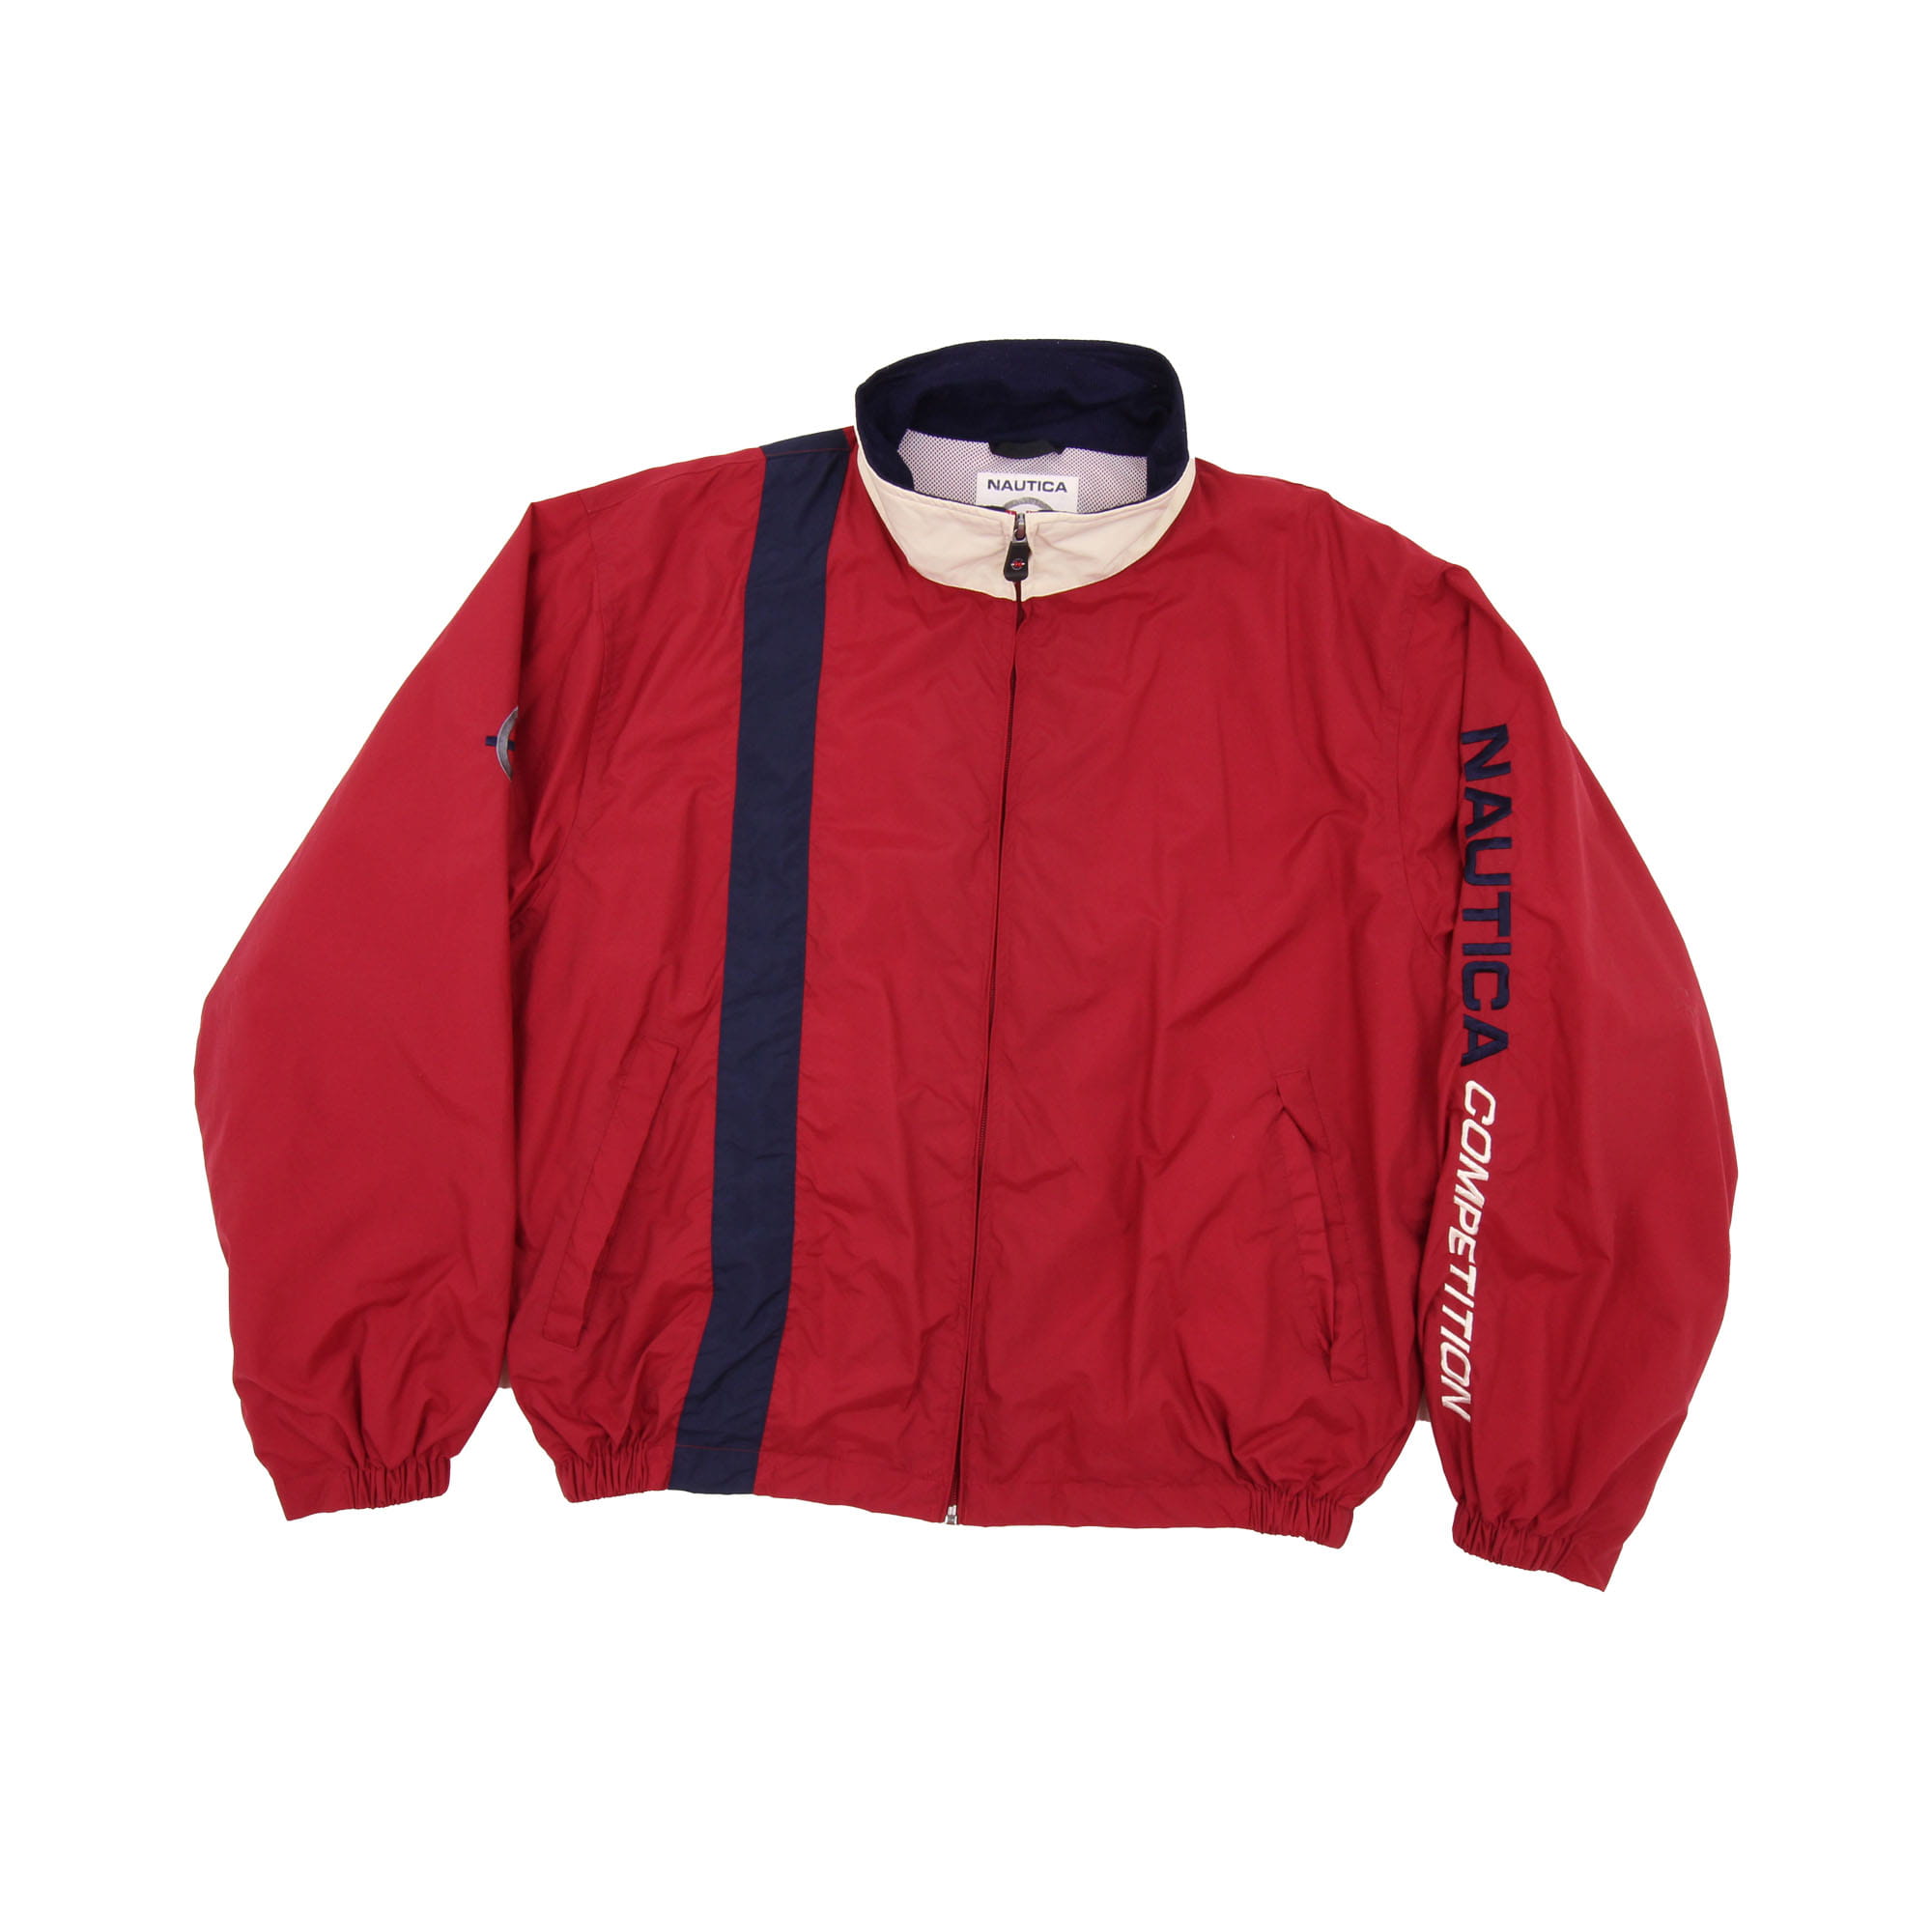 Nautica Competition Thin Jacket Red -  XL